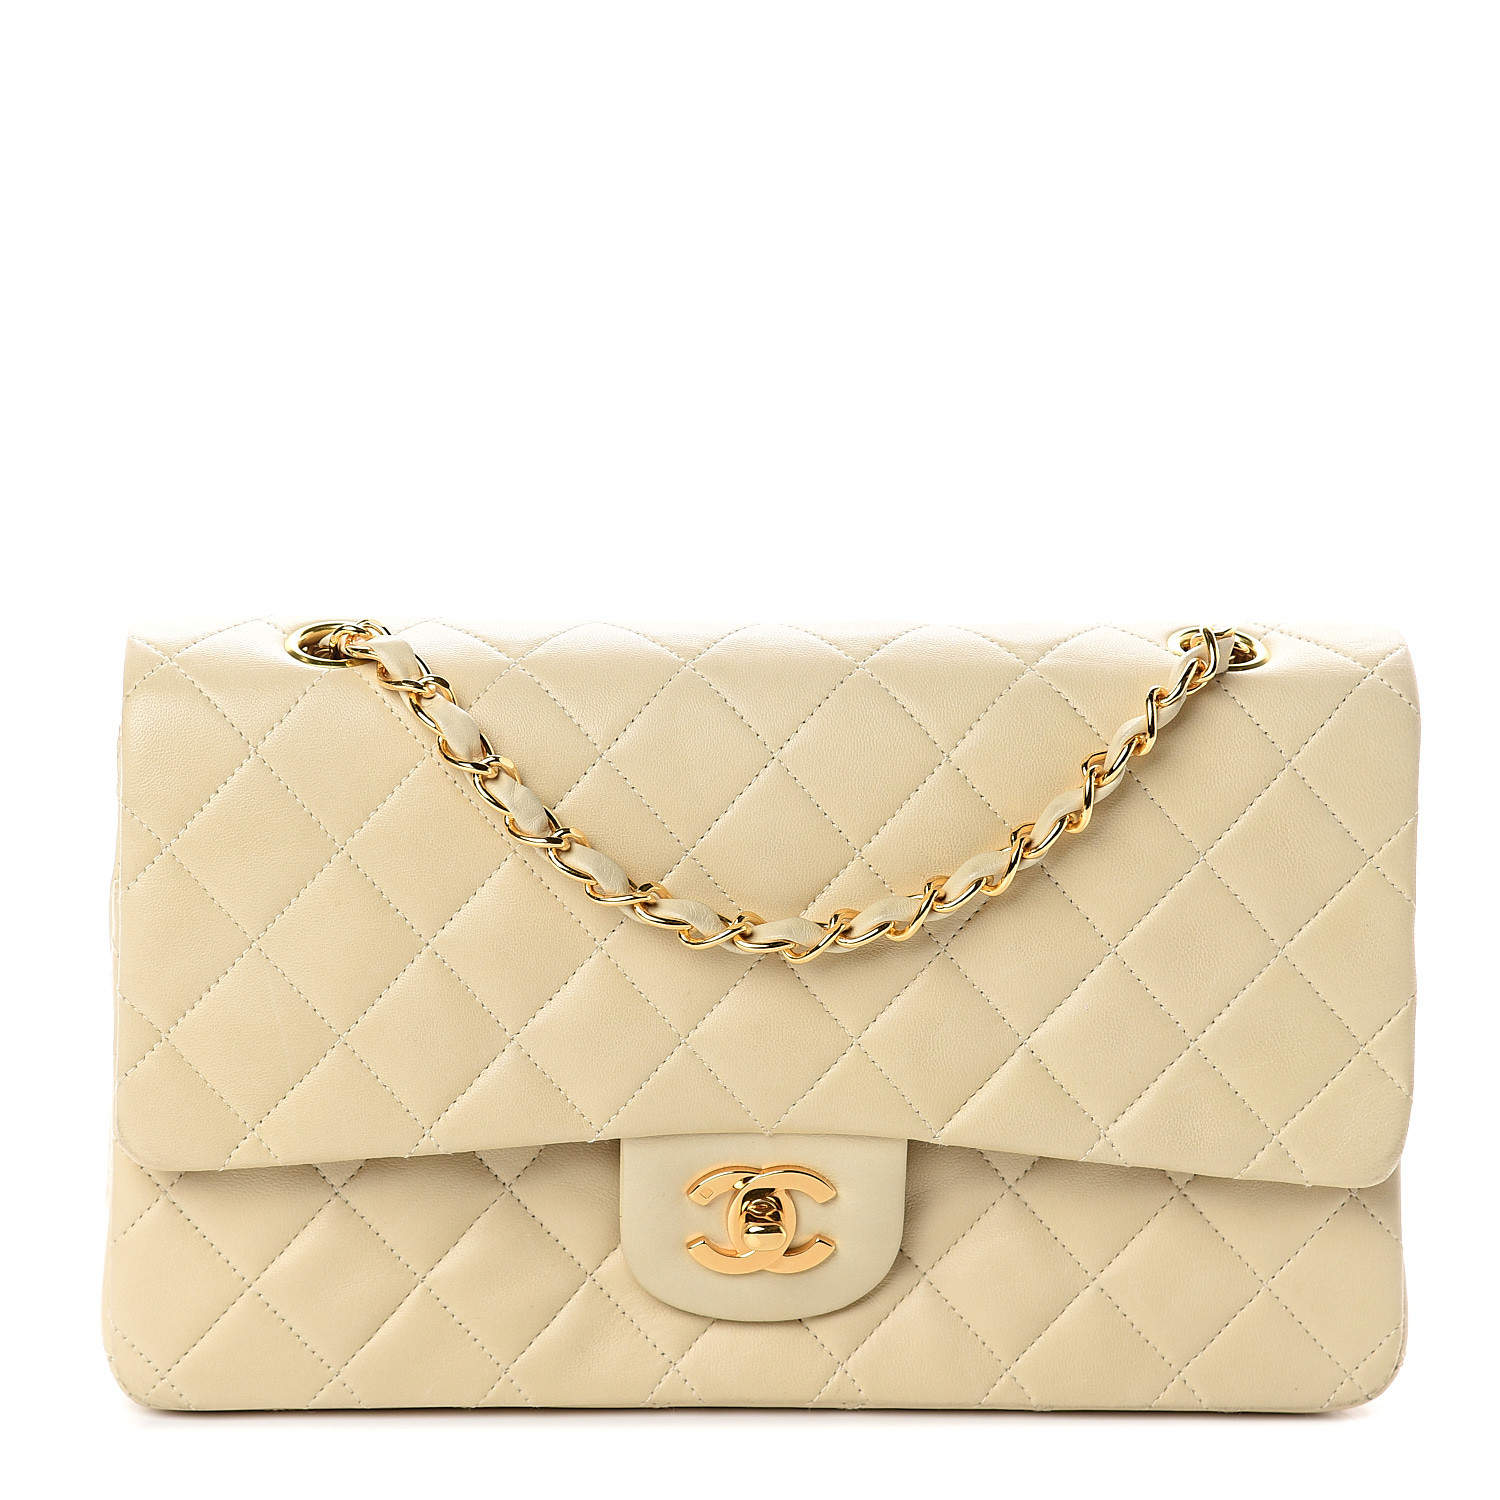 CHANEL Lambskin Quilted Medium Double Flap Beige 541643